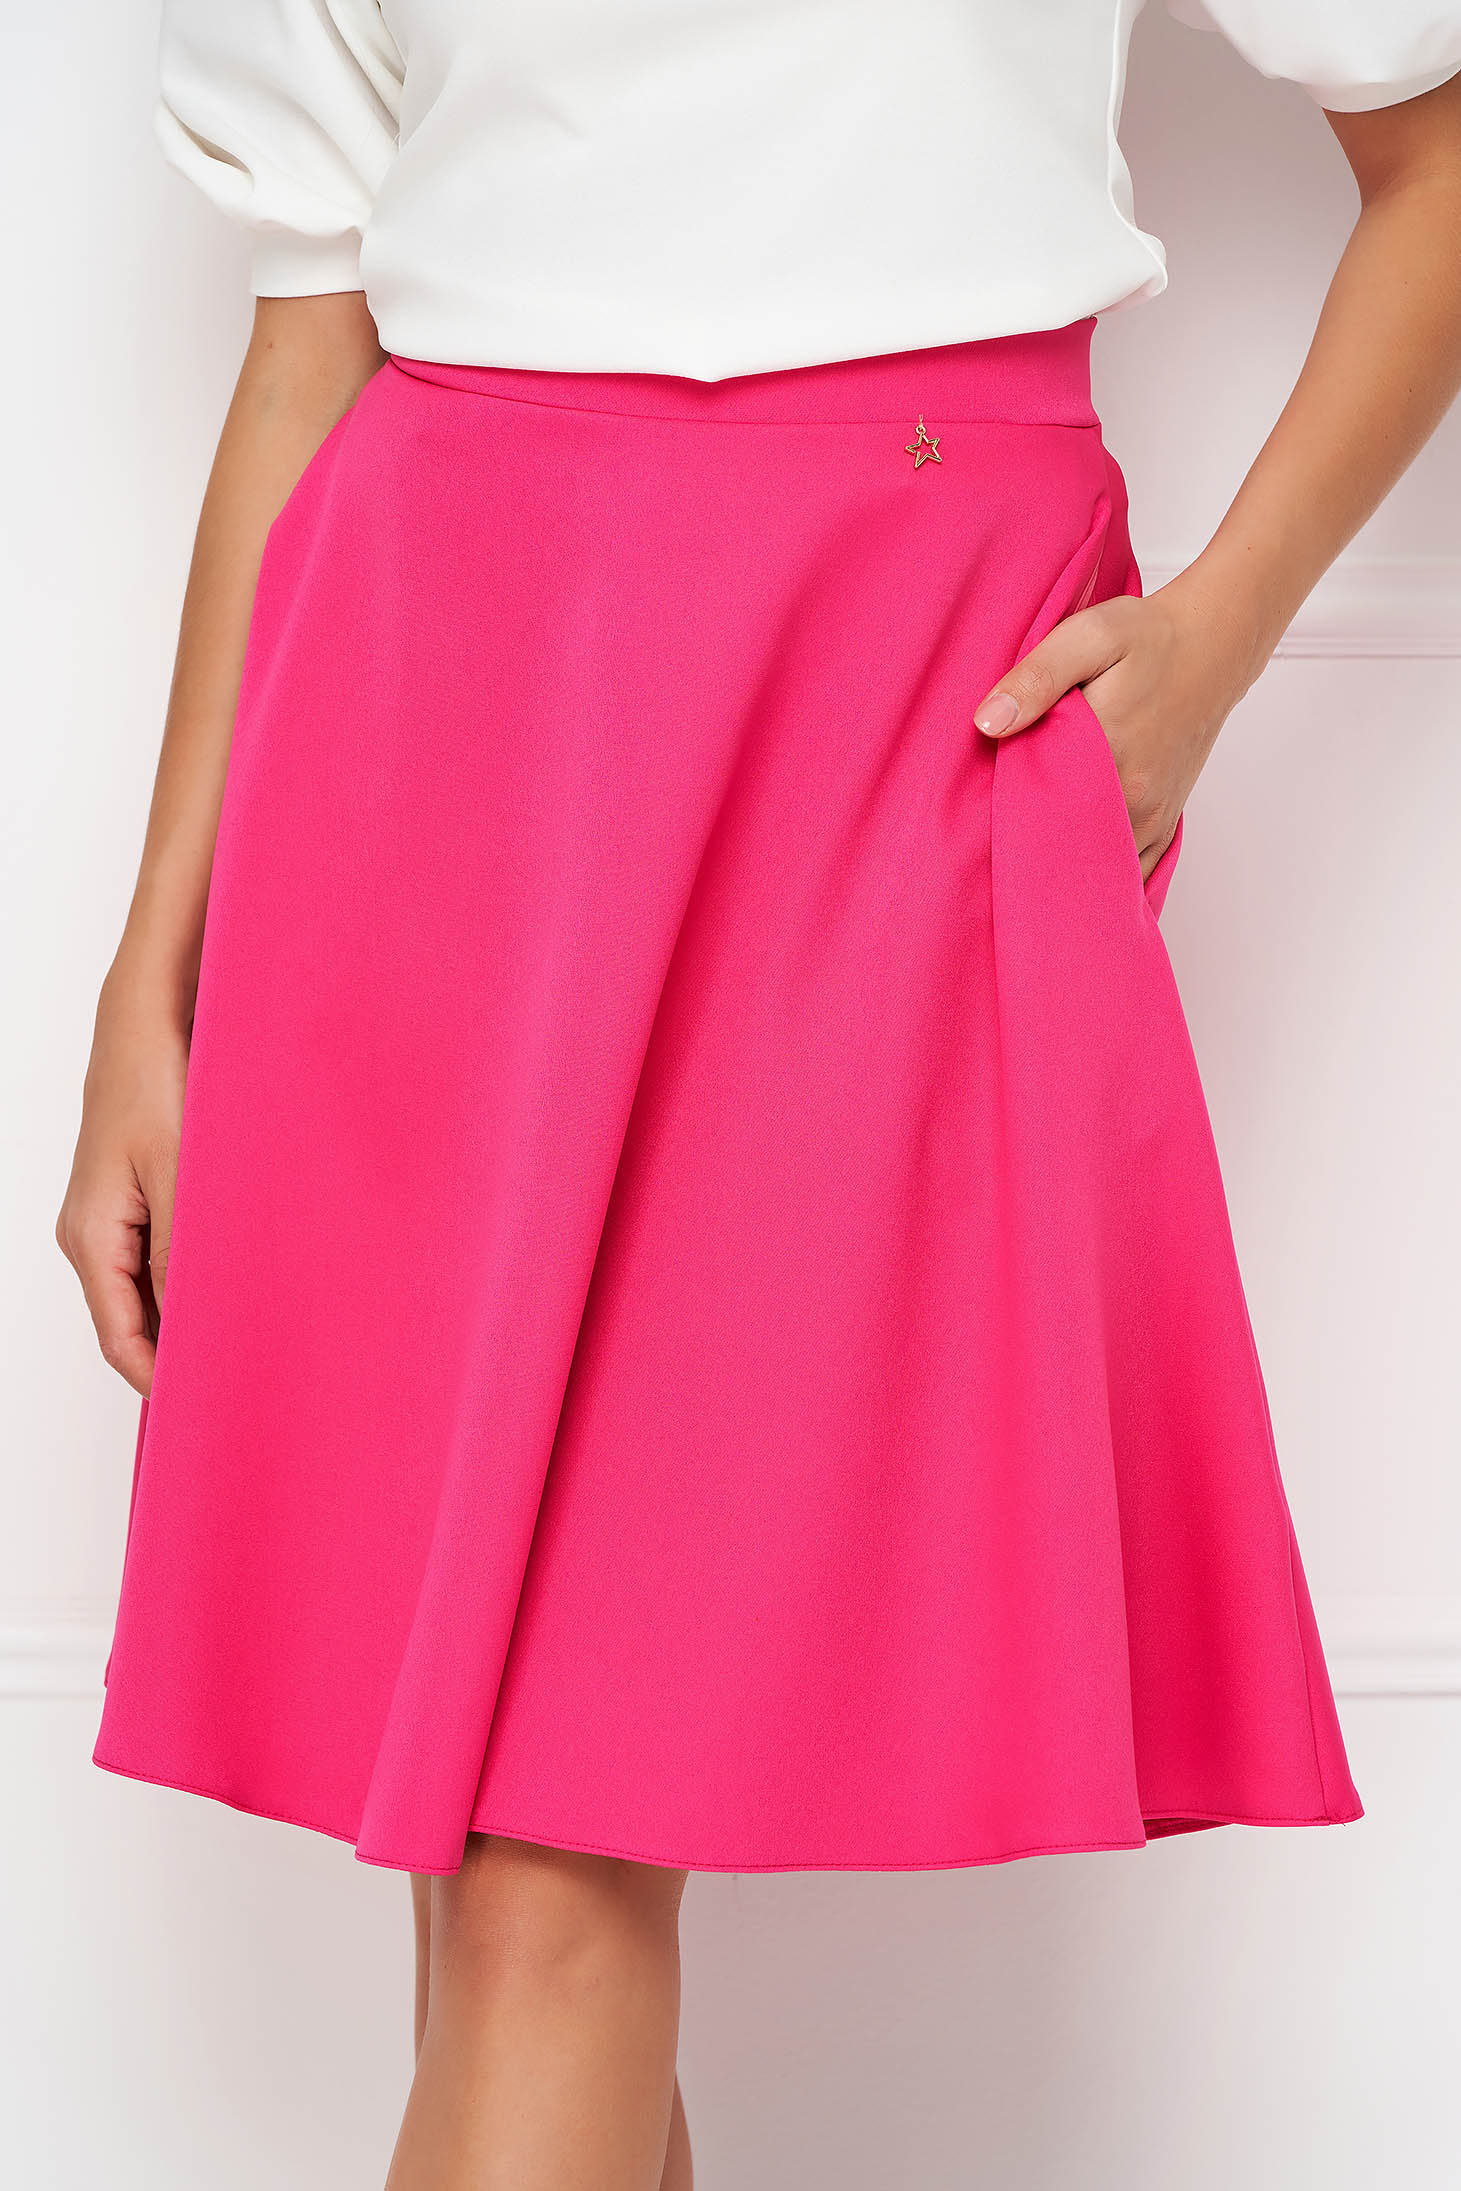 Fuchsia Slightly Stretchy Fabric Skirt in A-line with Pockets - StarShinerS 5 - StarShinerS.com